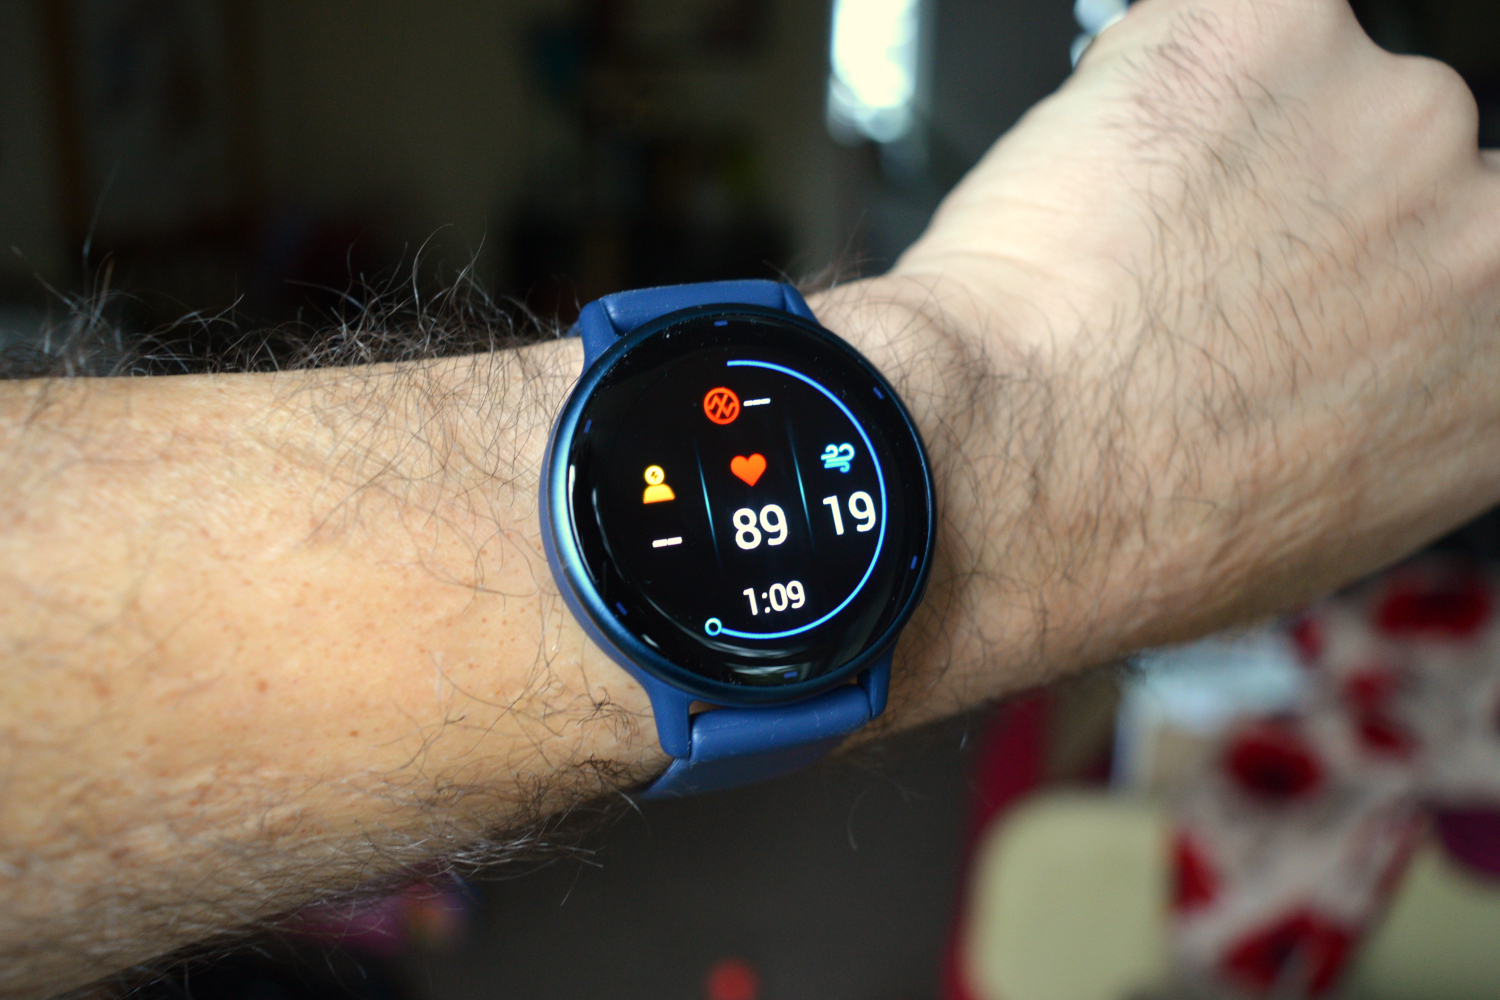 Garmin Vivoactive 5 In-Depth Review: Now With An AMOLED Display!